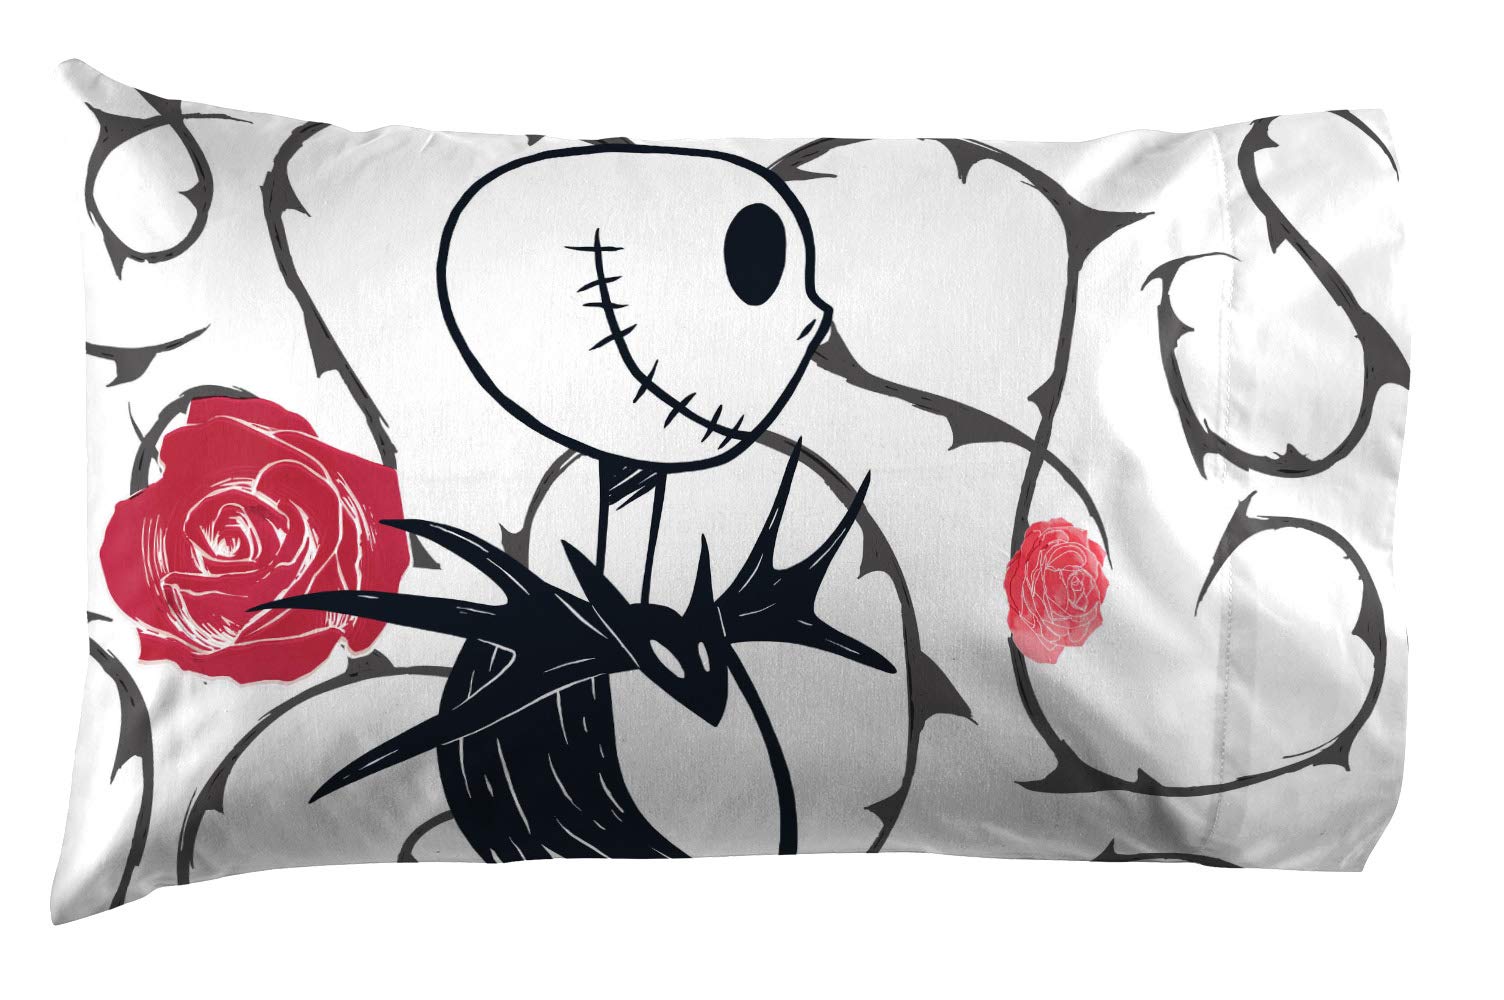 Jay Franco Disney Nightmare Before Christmas Moonlight 5 Piece Twin Bed Set - Includes Reversible Comforter & Sheet Set - Features Jack Skellington and Sally - Super Soft Microfiber